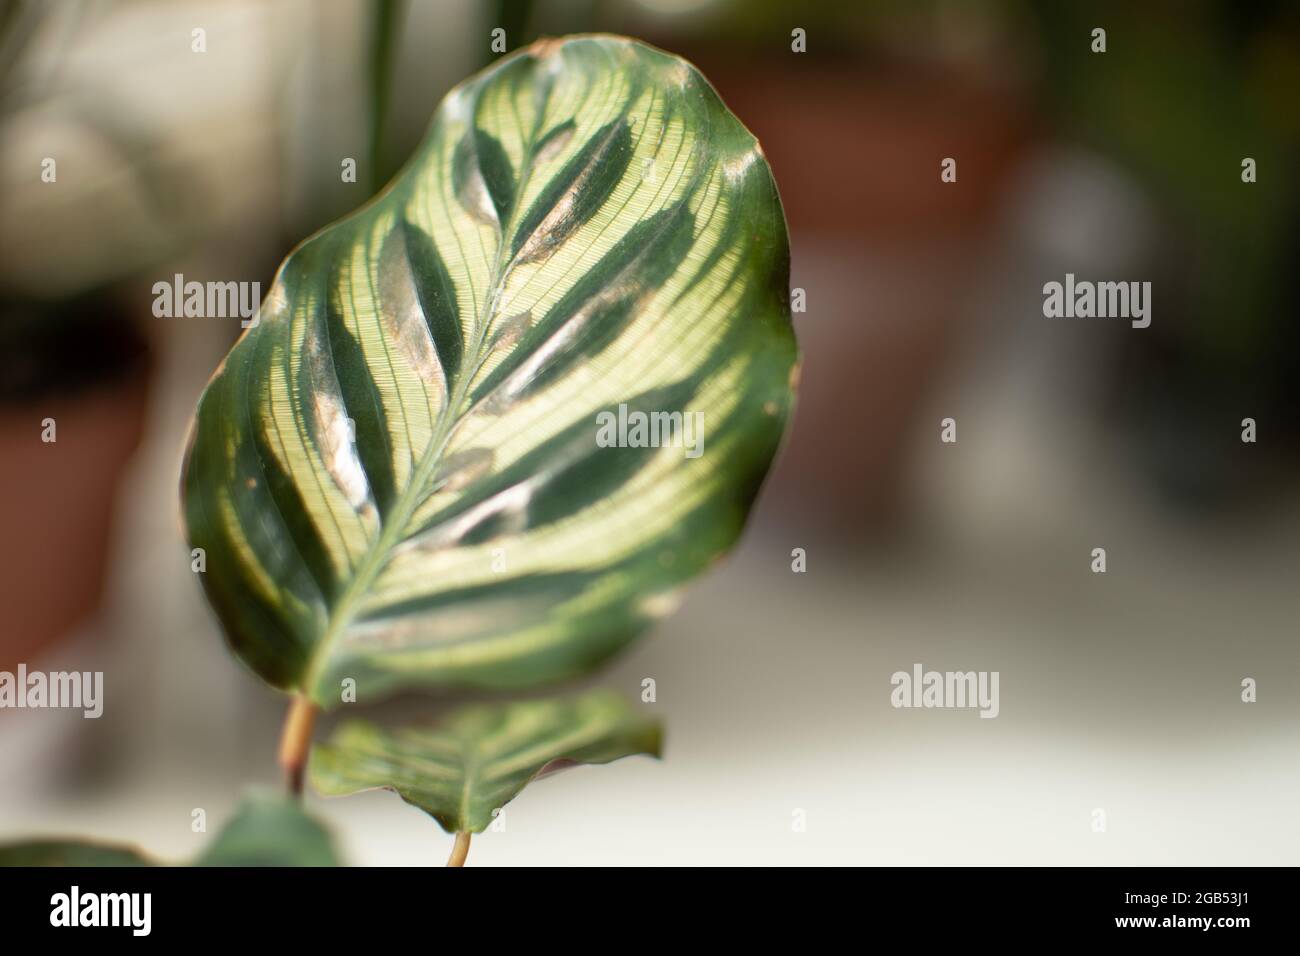 A close up view of the leaf of a Goeppertia makoyana, otherwise known as peacock plant or cathedral windows as it basks in the sunlight indoors. Stock Photo